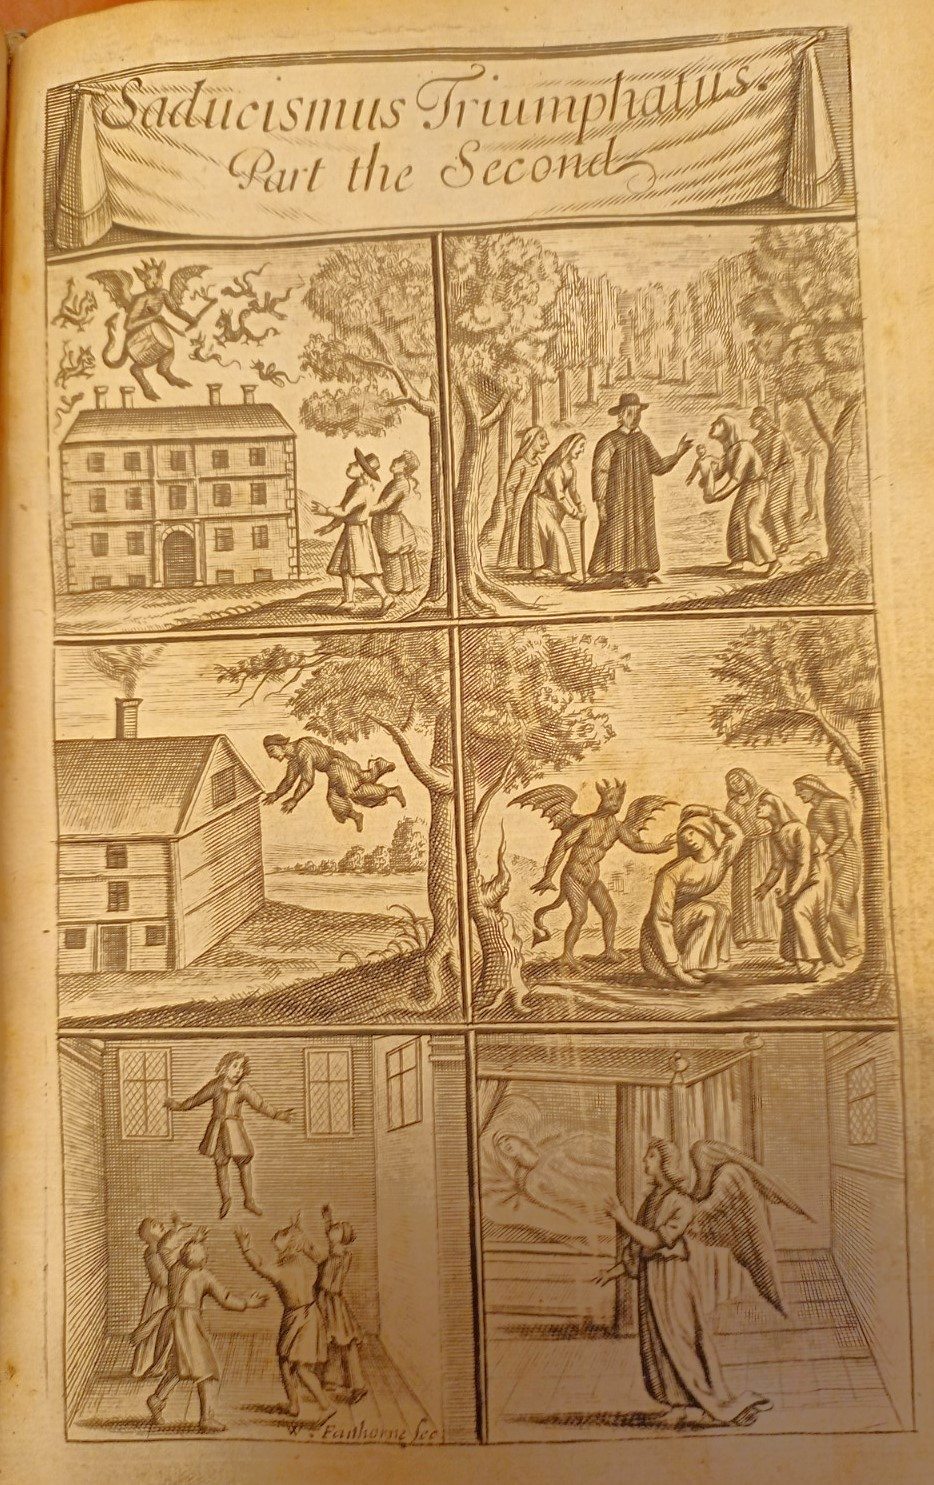 Series of engravings showing various supernatural occurrences 